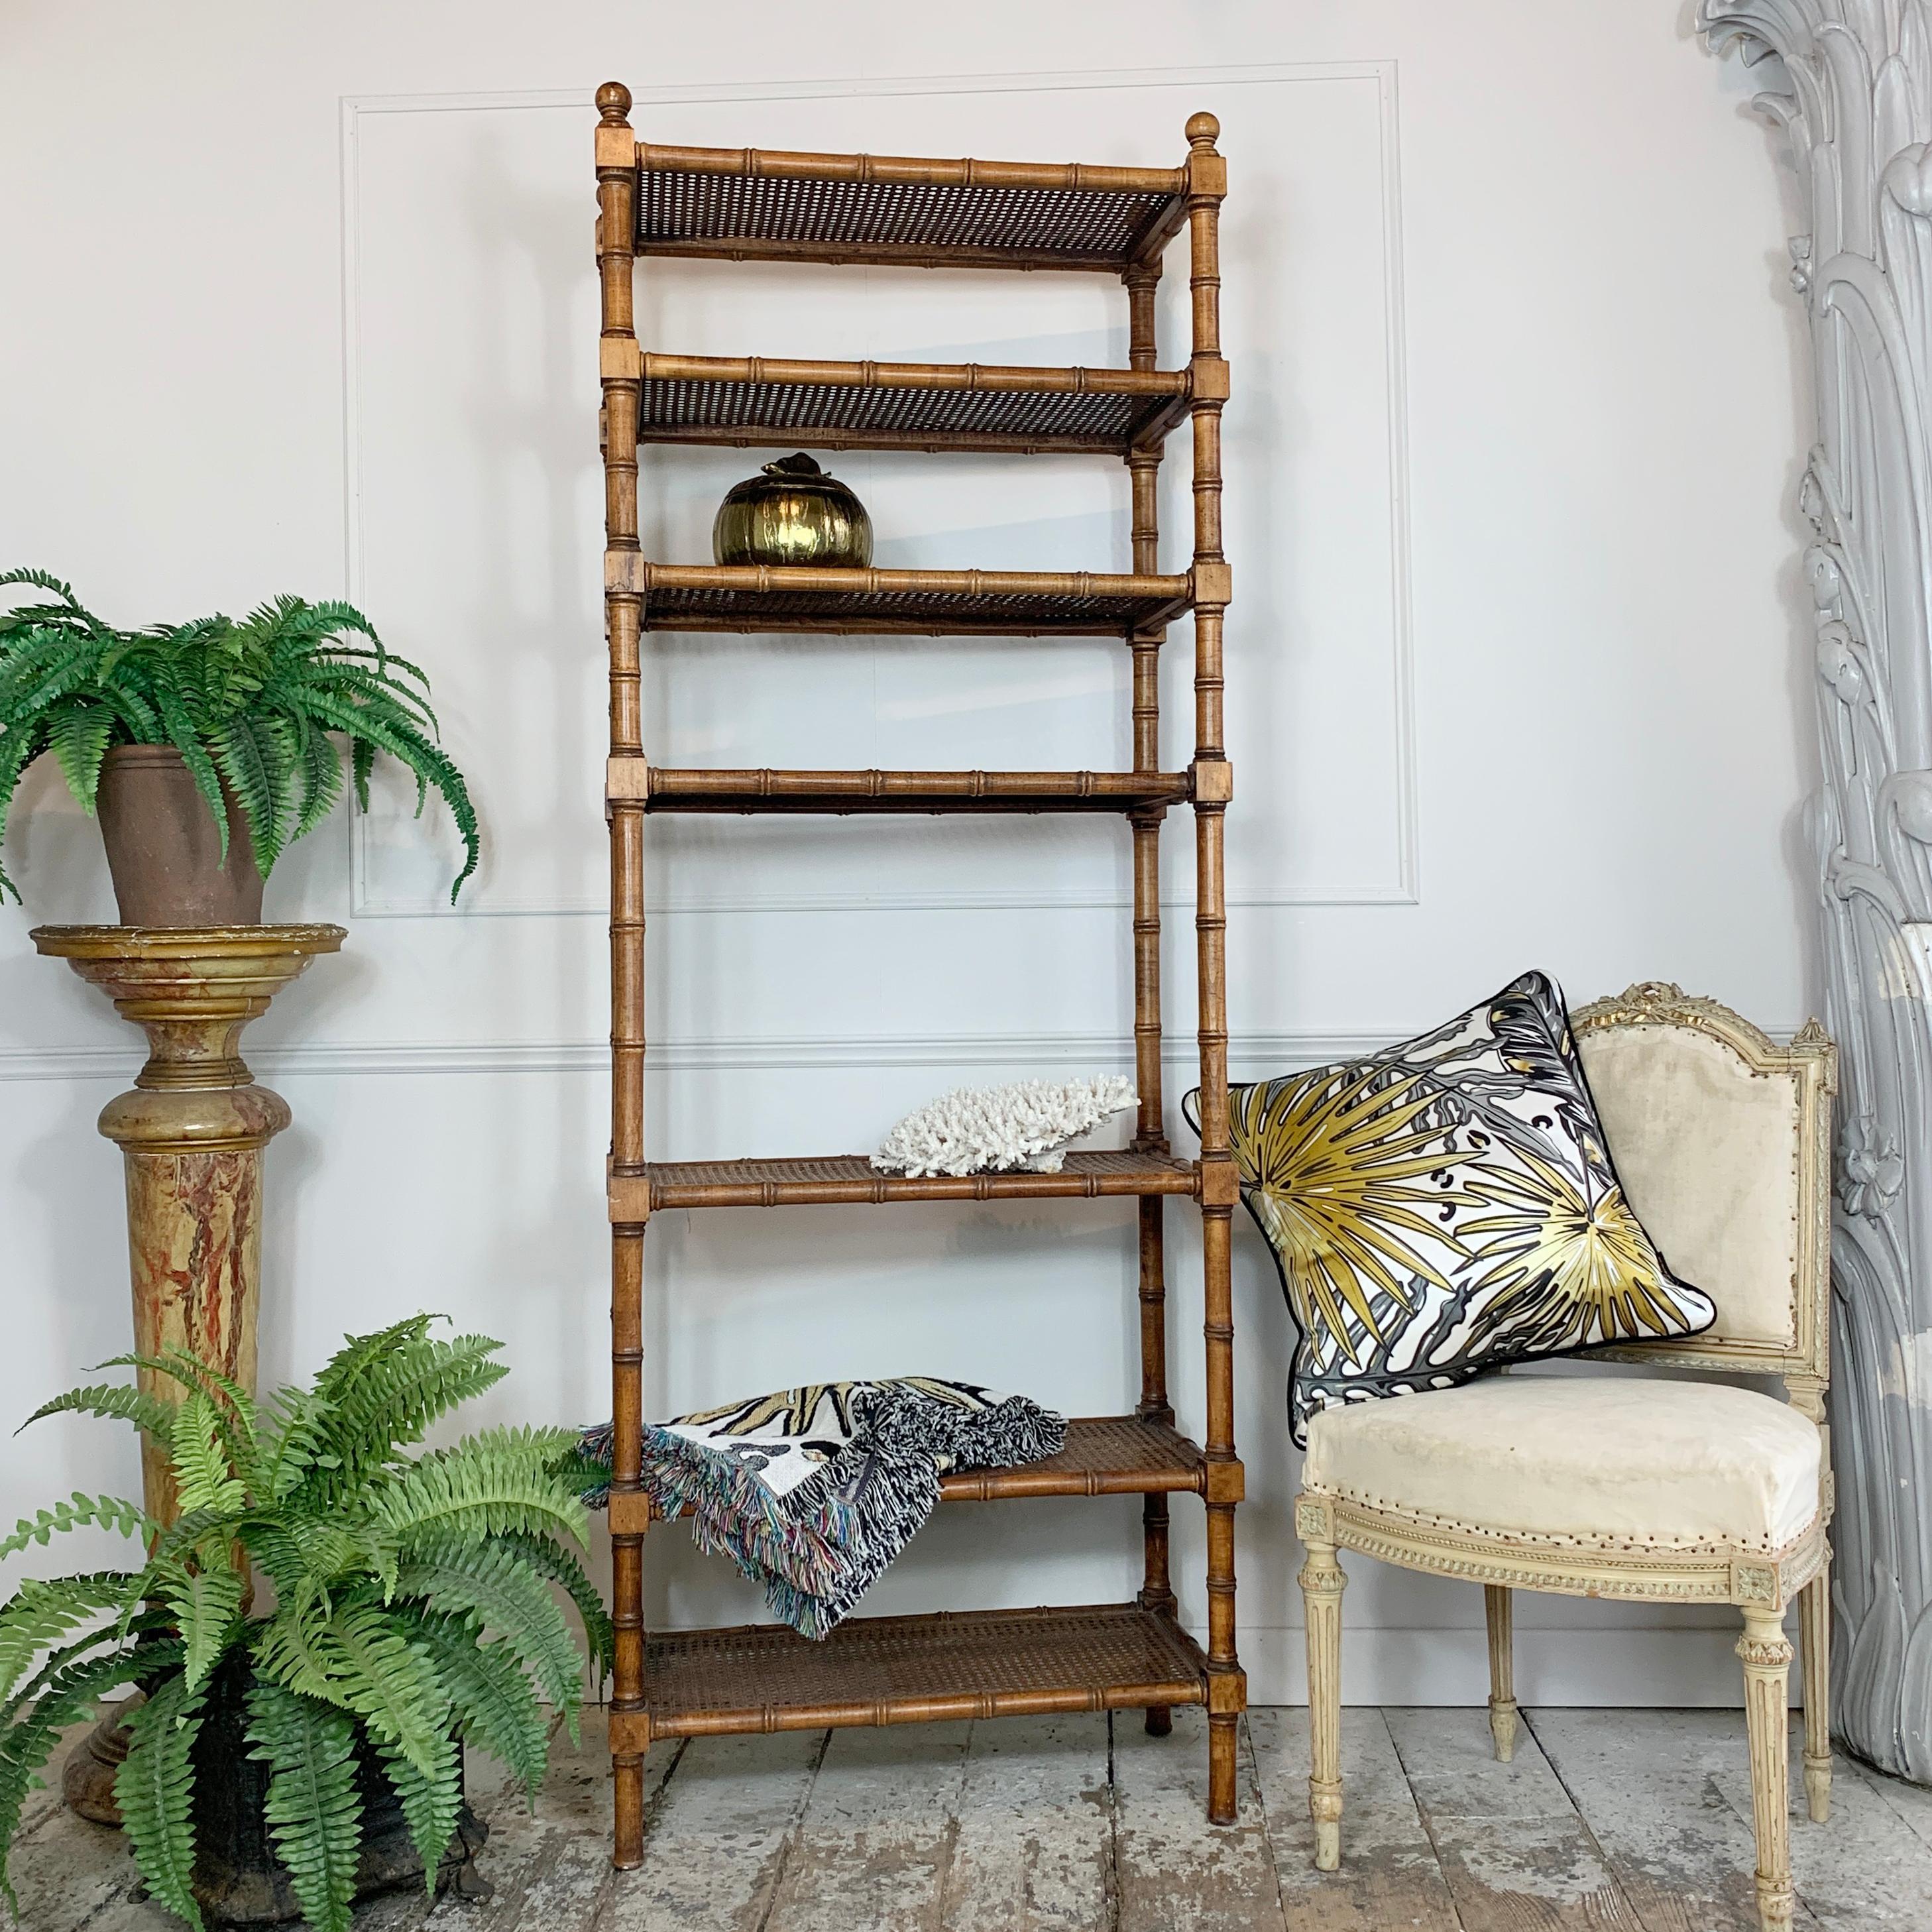 Wonderful French Faux Bamboo Etagere, the frame is pine, all shelving is canework. Dating to circa 1925-1940, this tall elegant etagere is of impeccable quality, has 7 shelves, all the canework is in very good order as you can see from the